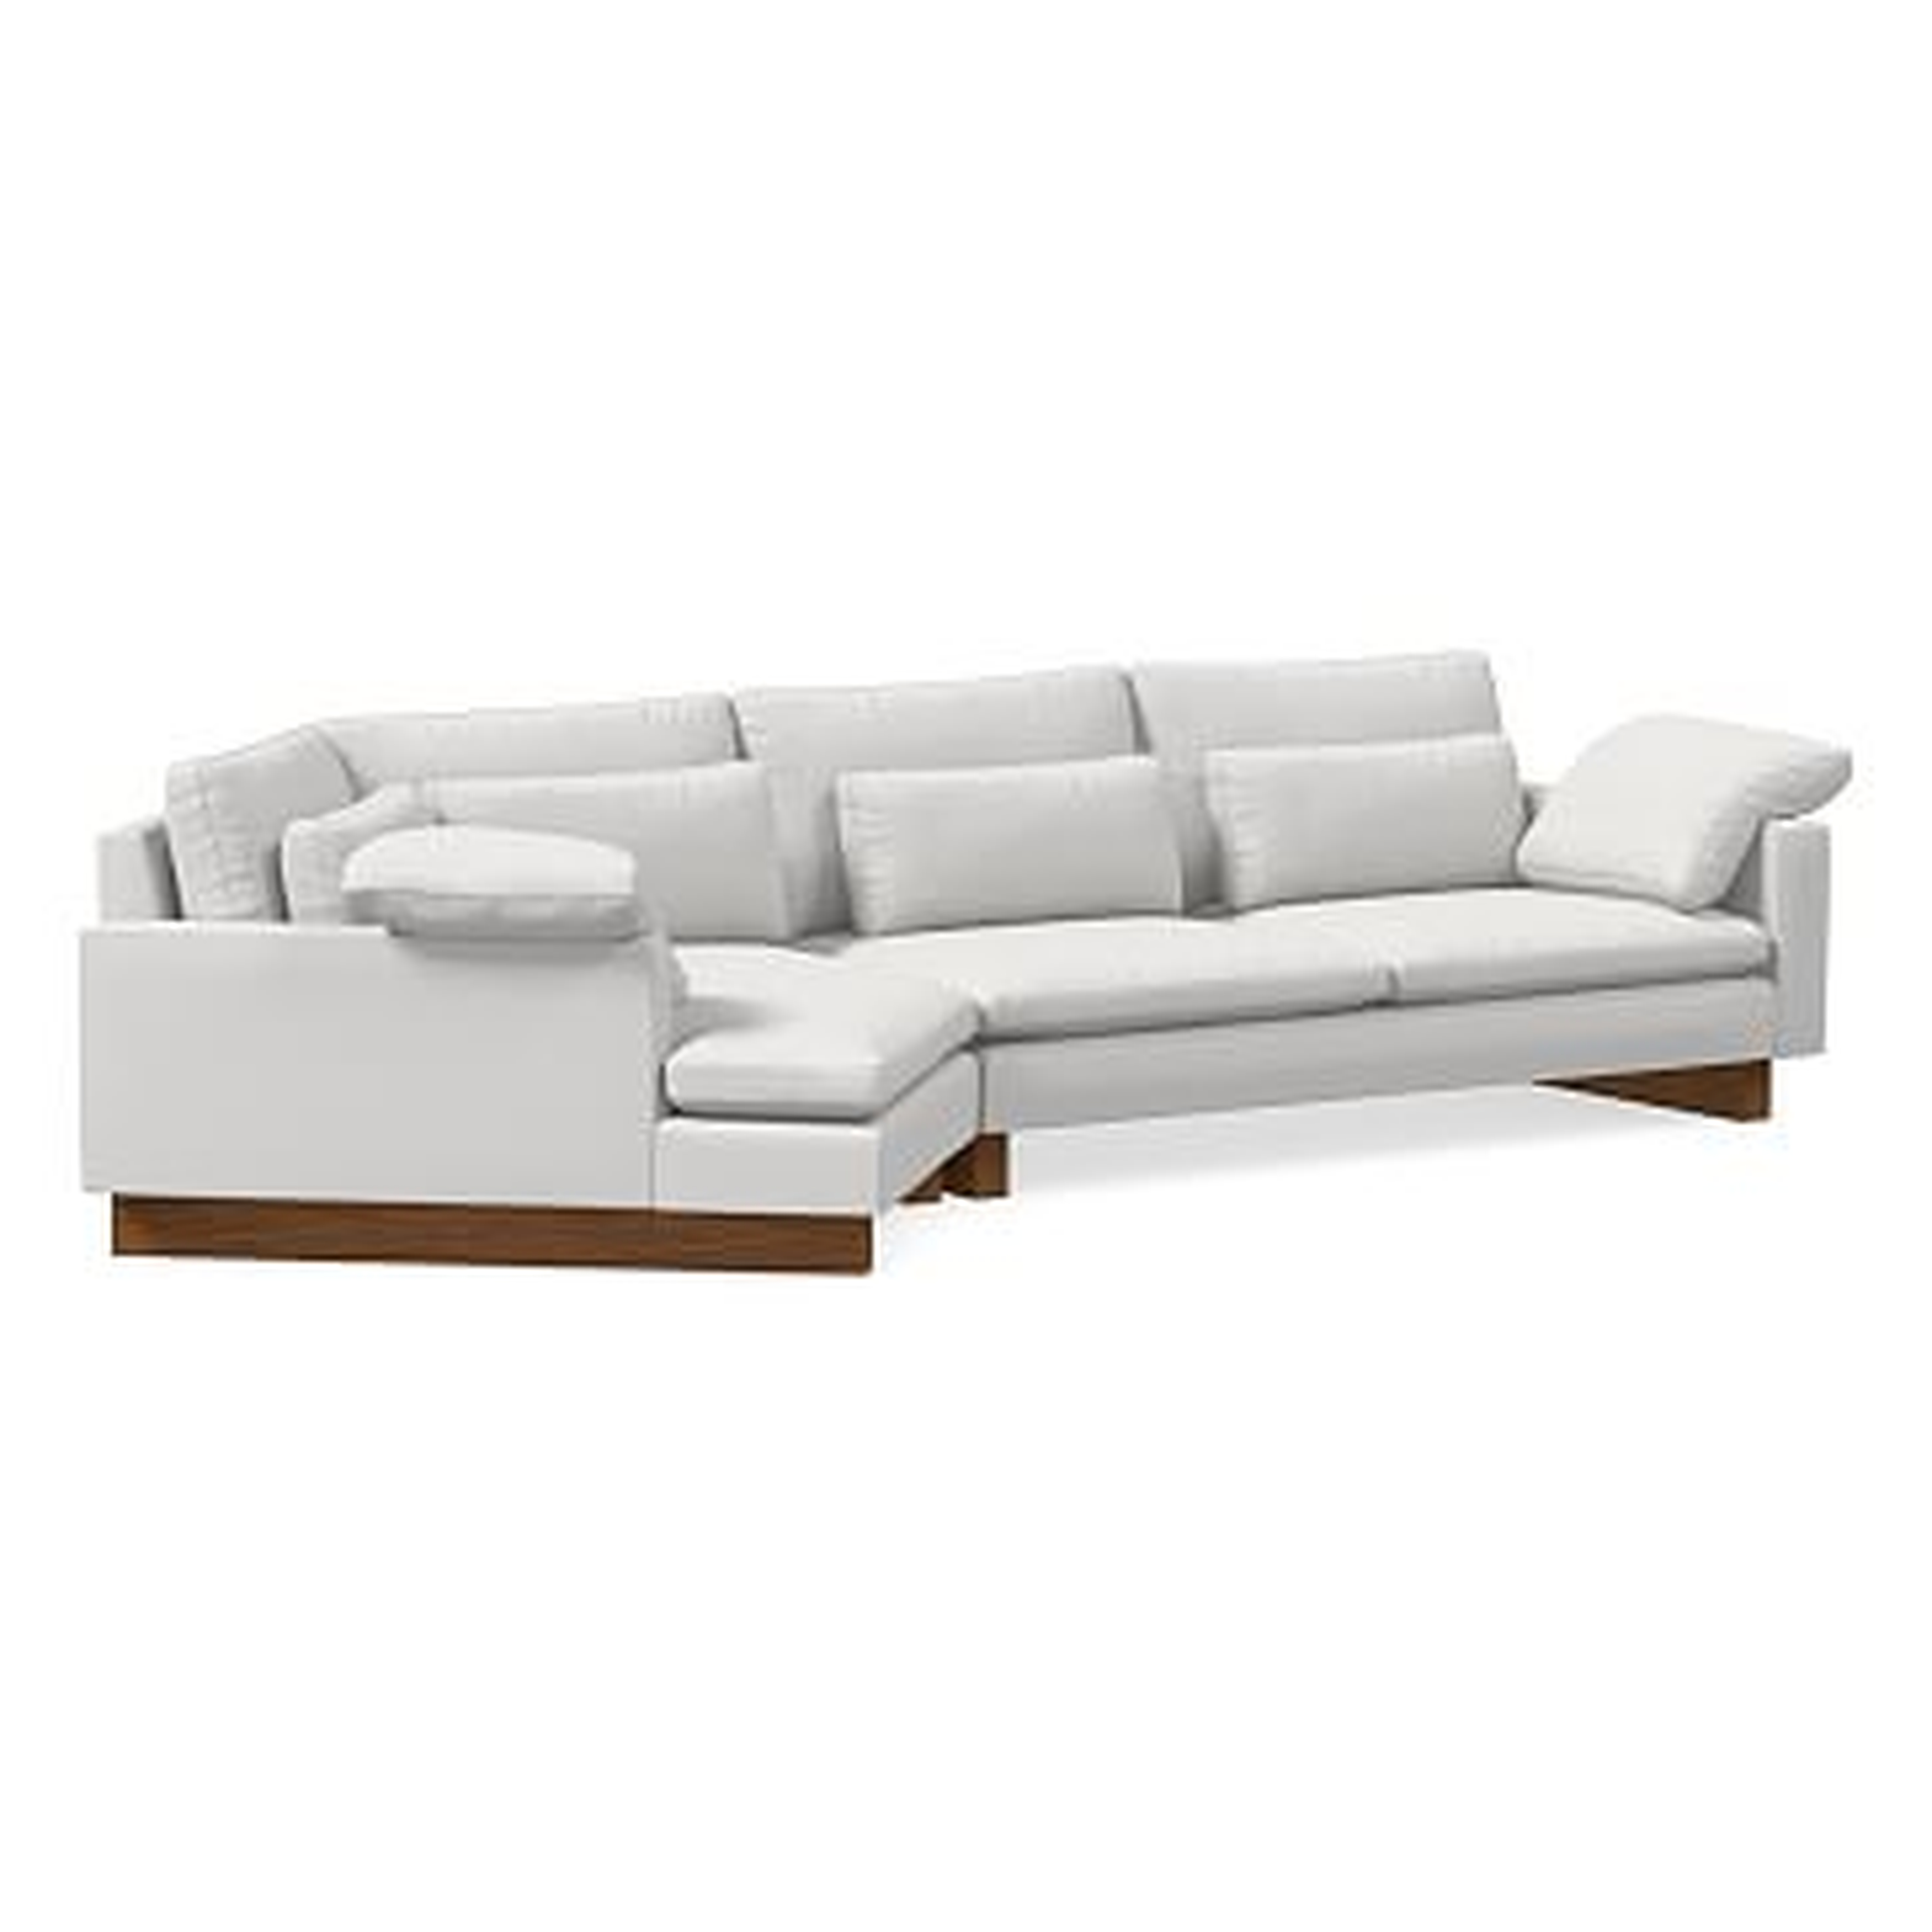 Harmony Sectional Set 48: Right Arm 2.5 Seater Sofa, Left Arm Cozy Corner, Down Blend, Performance Washed Canvas, White, Dark Walnut - West Elm